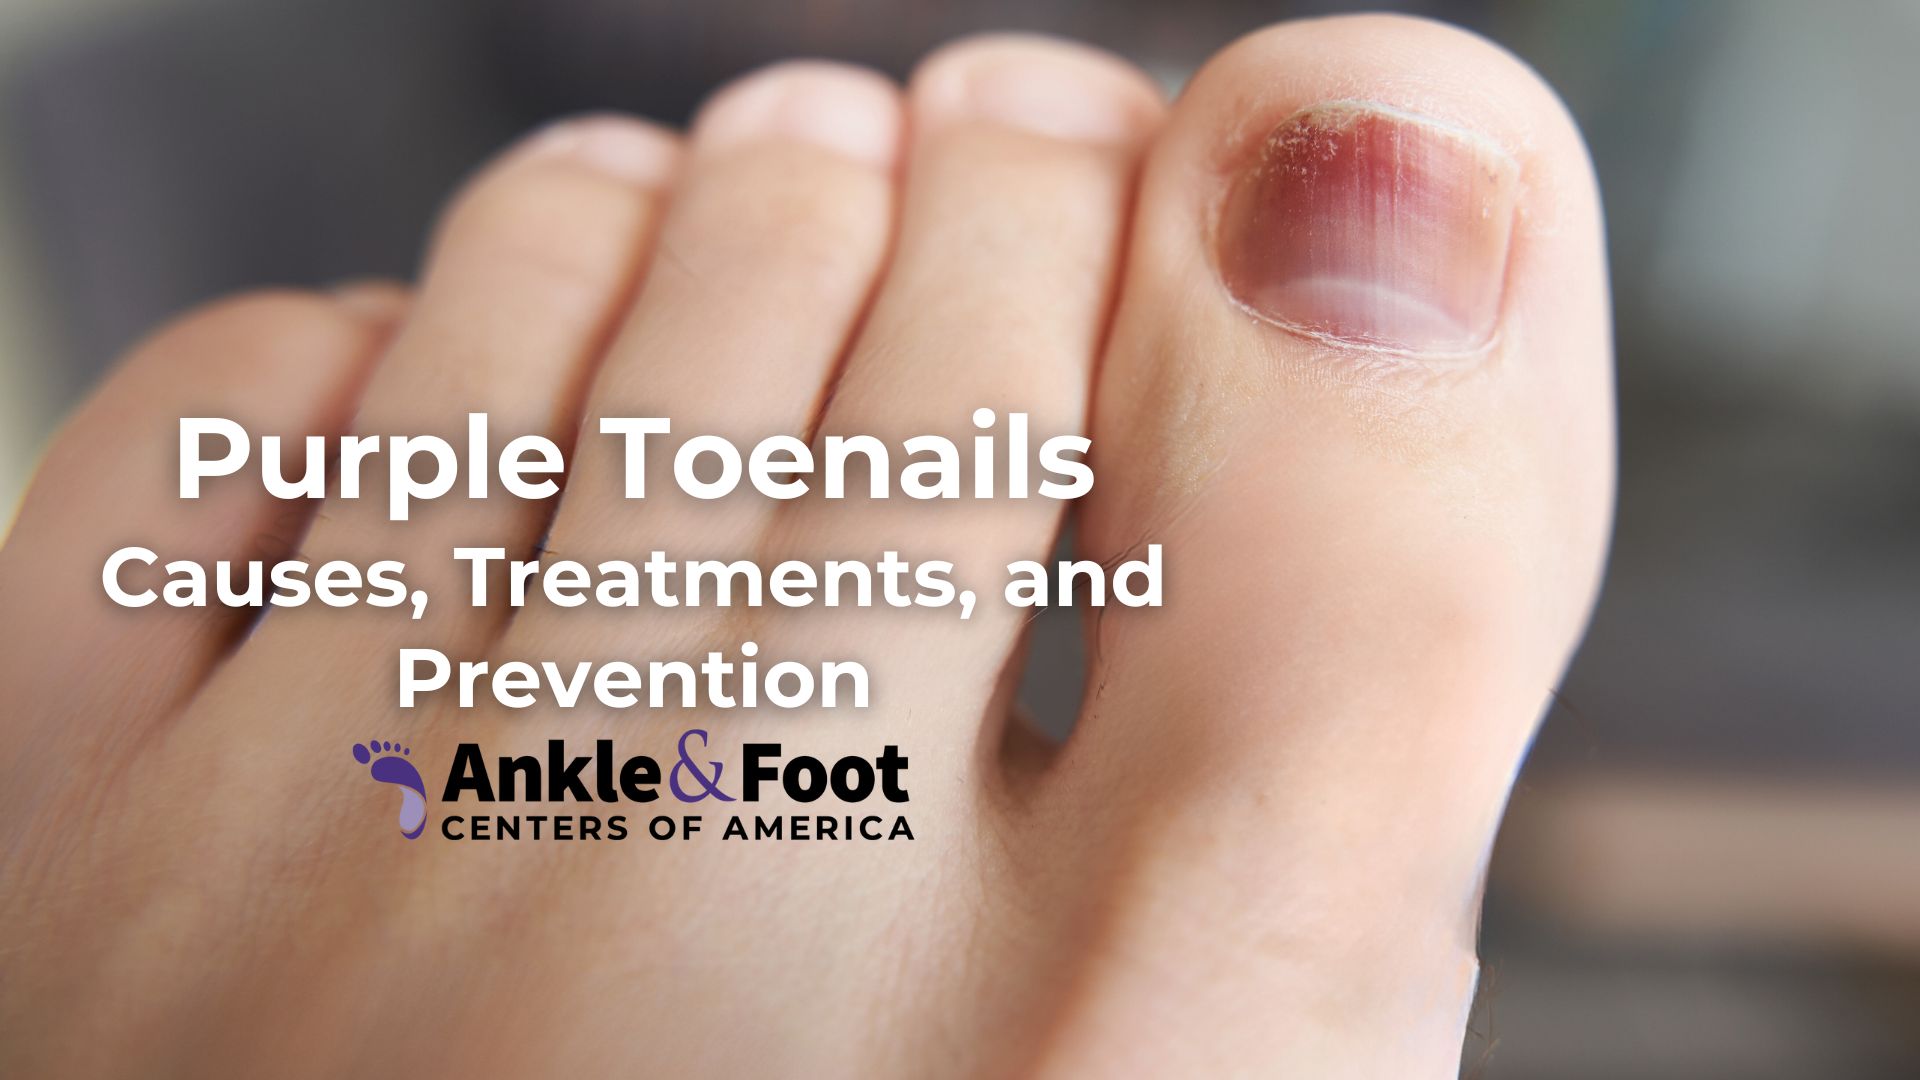 Purple Toenails: Causes, Treatments, and Prevention